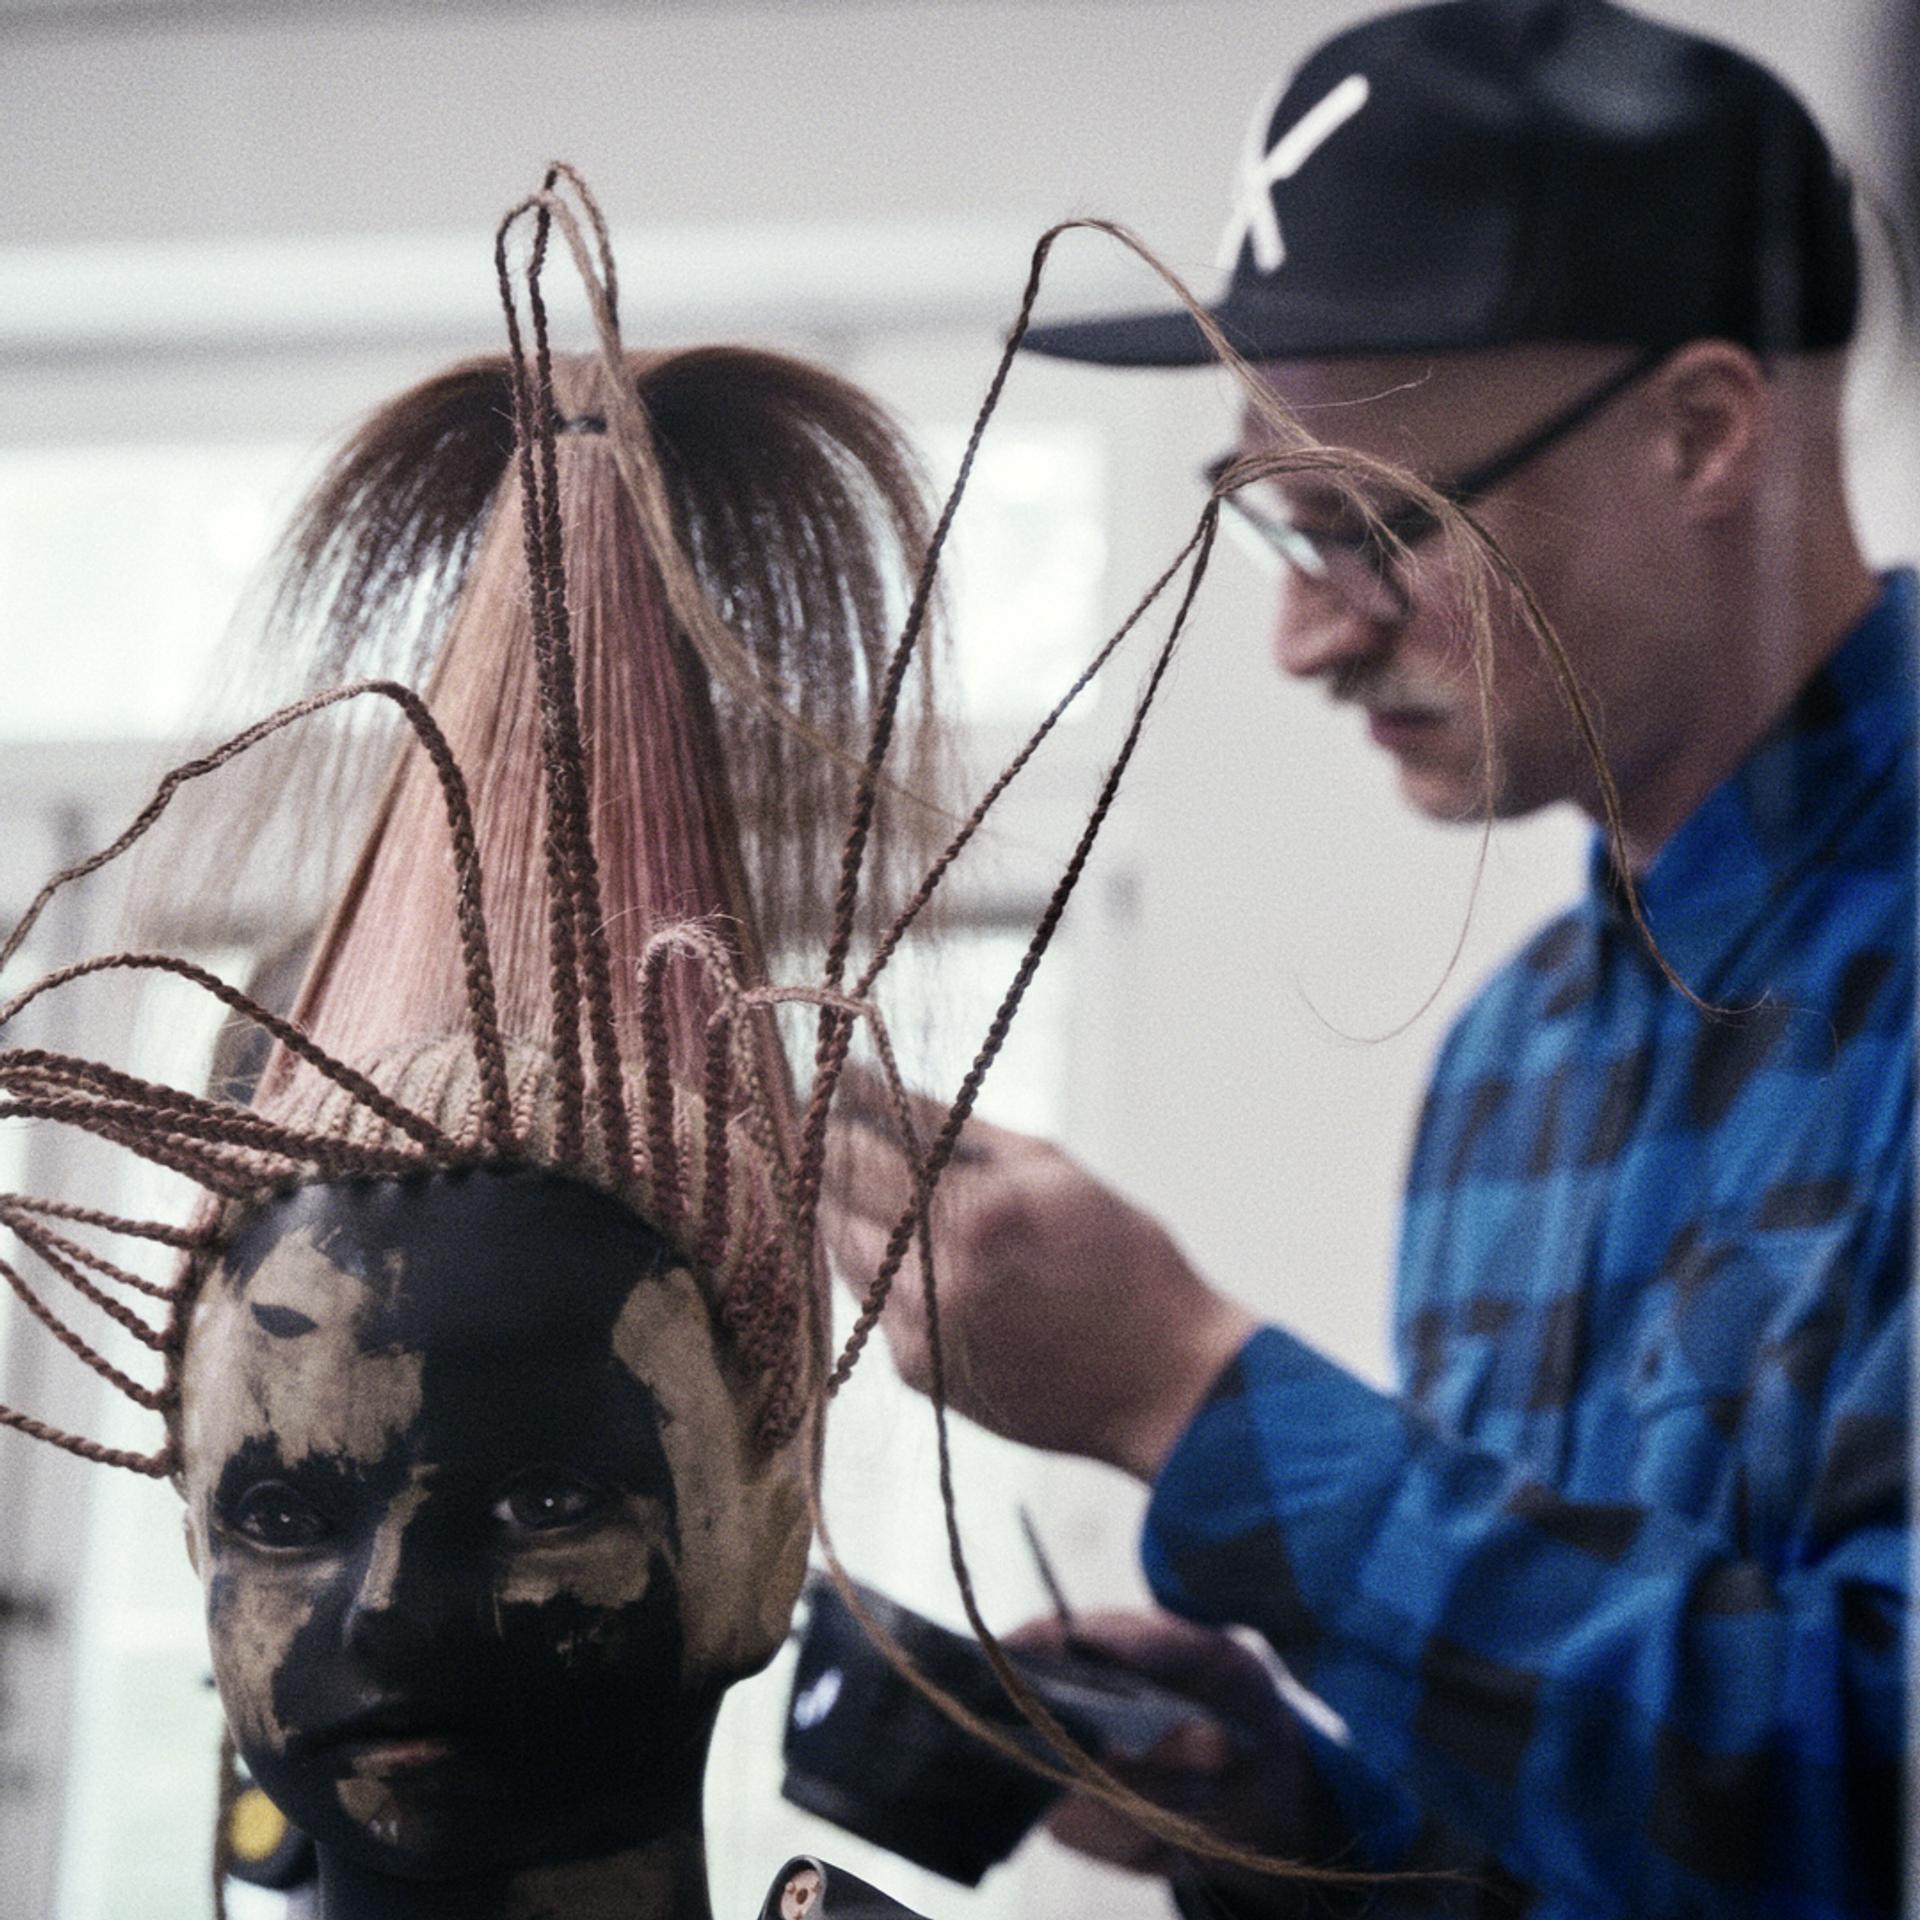 Dejan Cekanovic is a stylist and hairdresser with a lustrous career. But his work with dolls is what sees him really come alive creatively. 